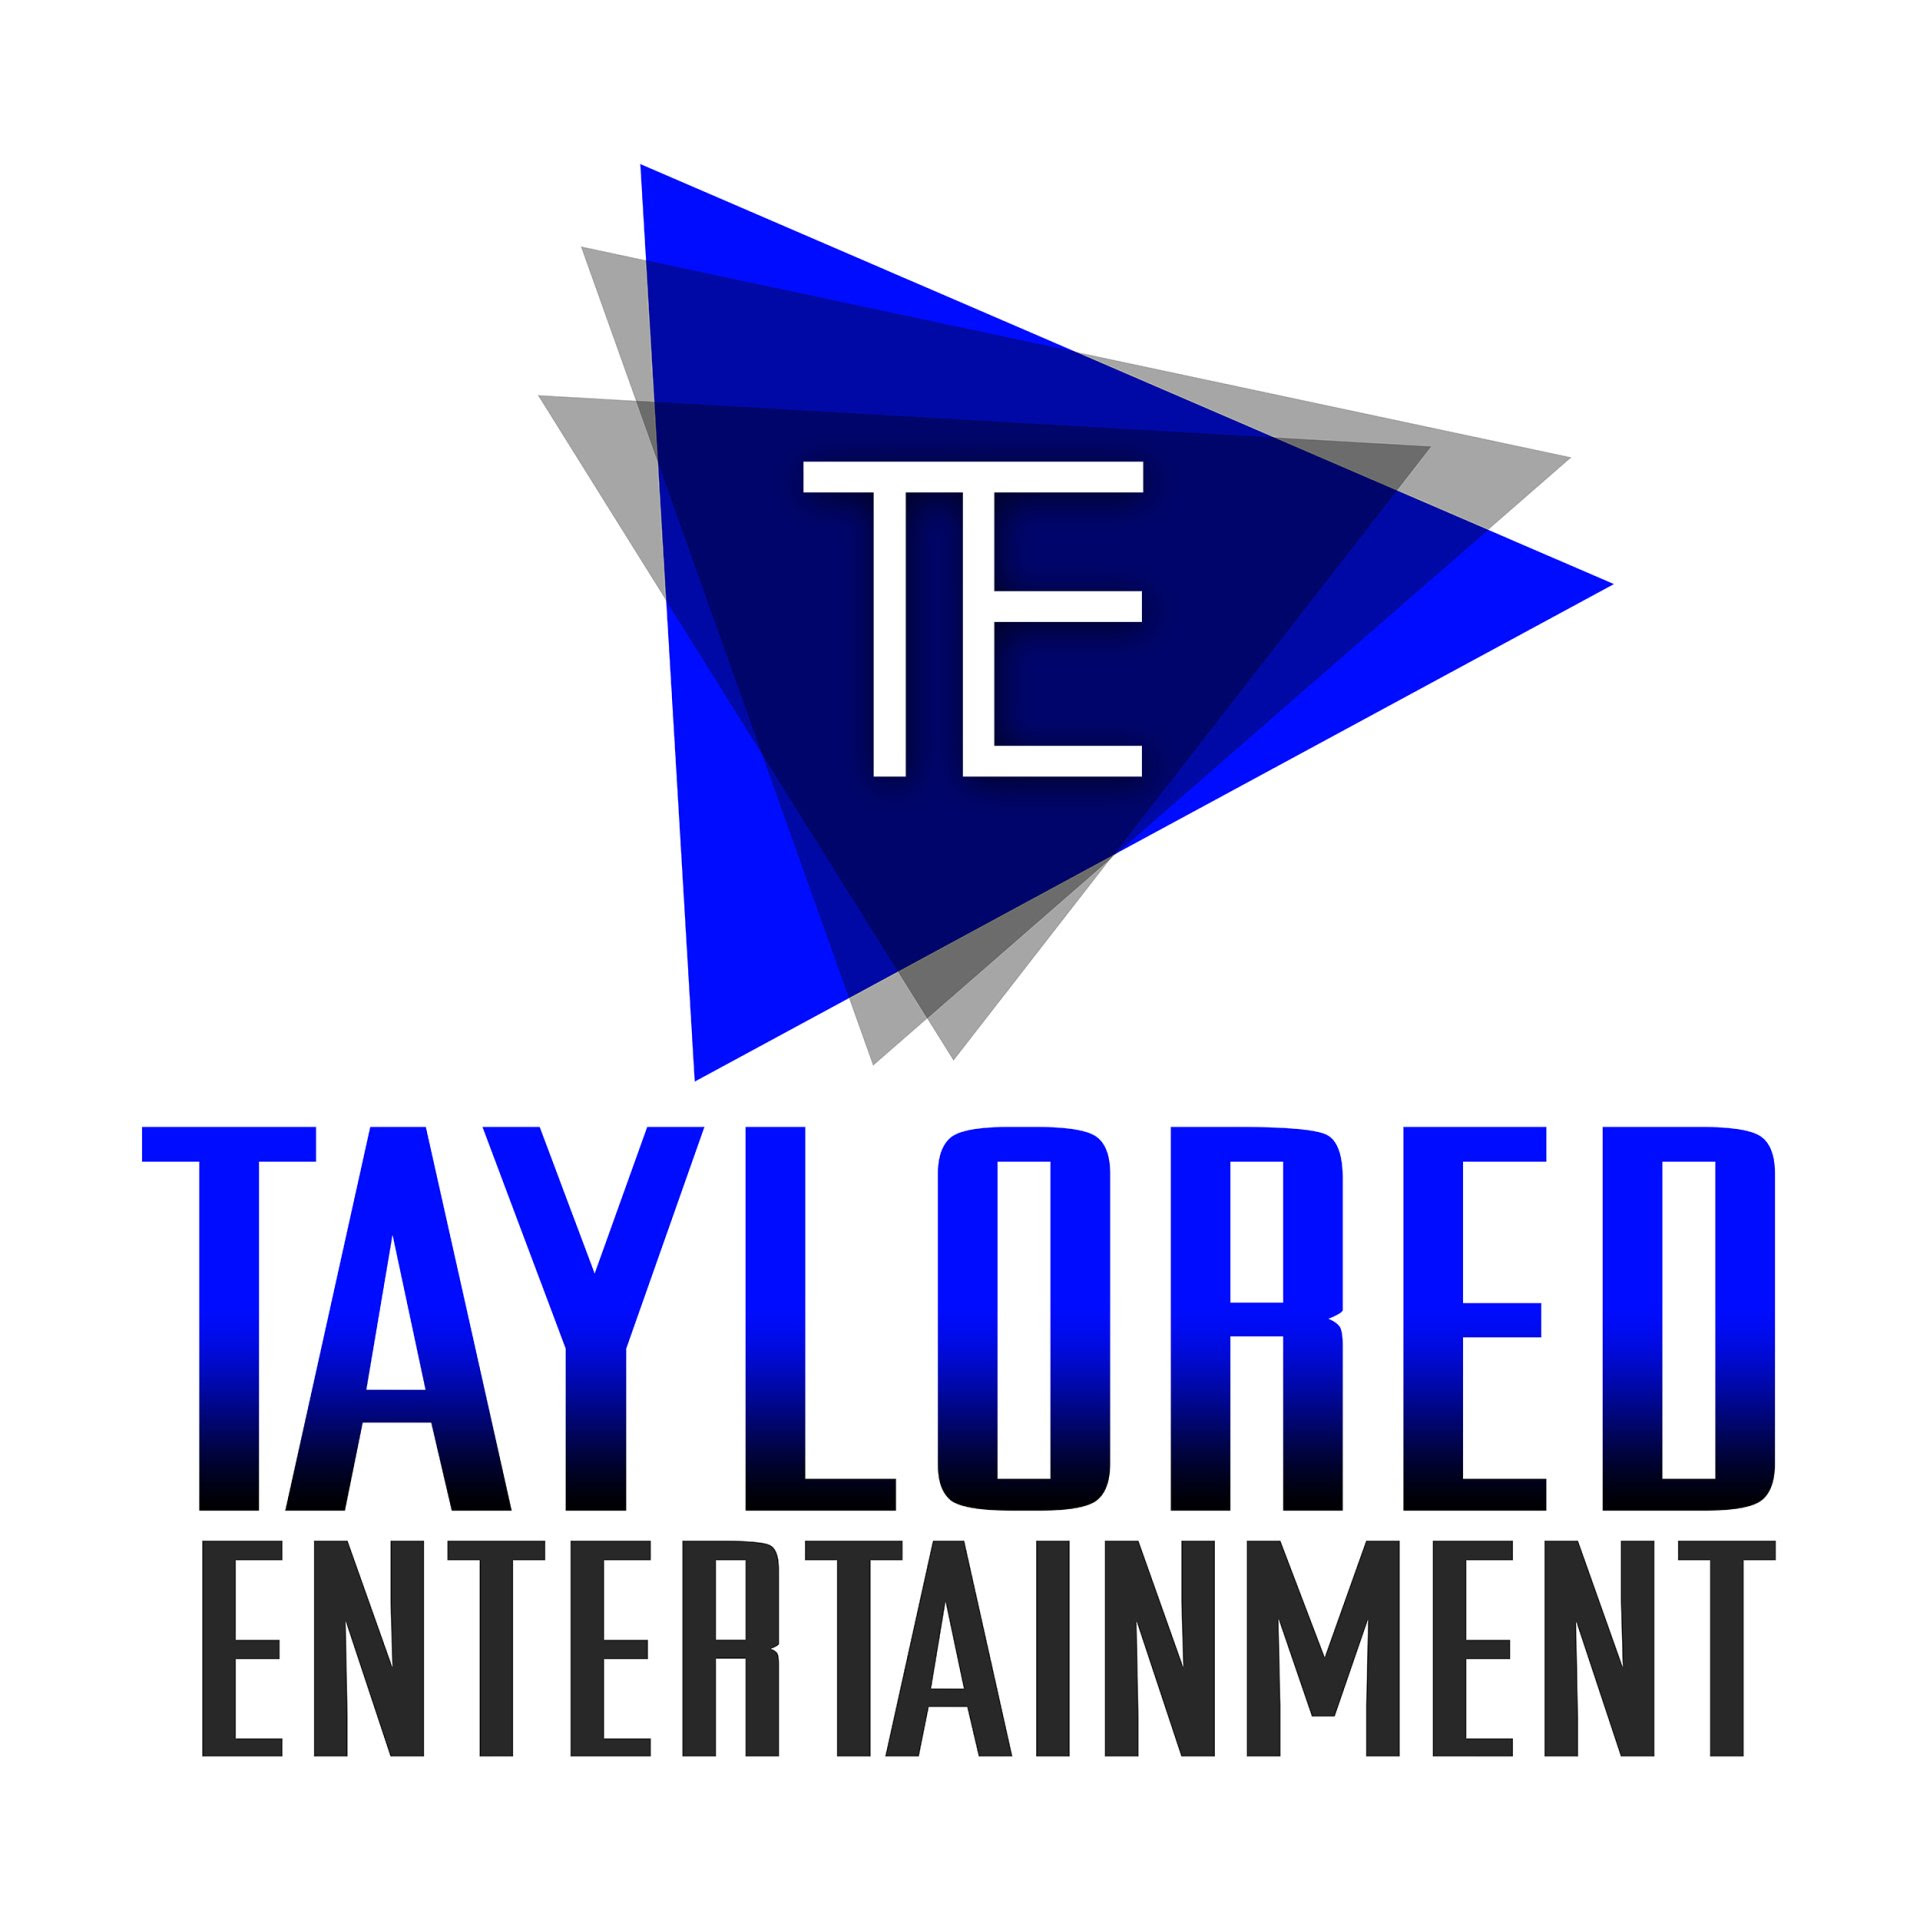 Taylored Entertainment